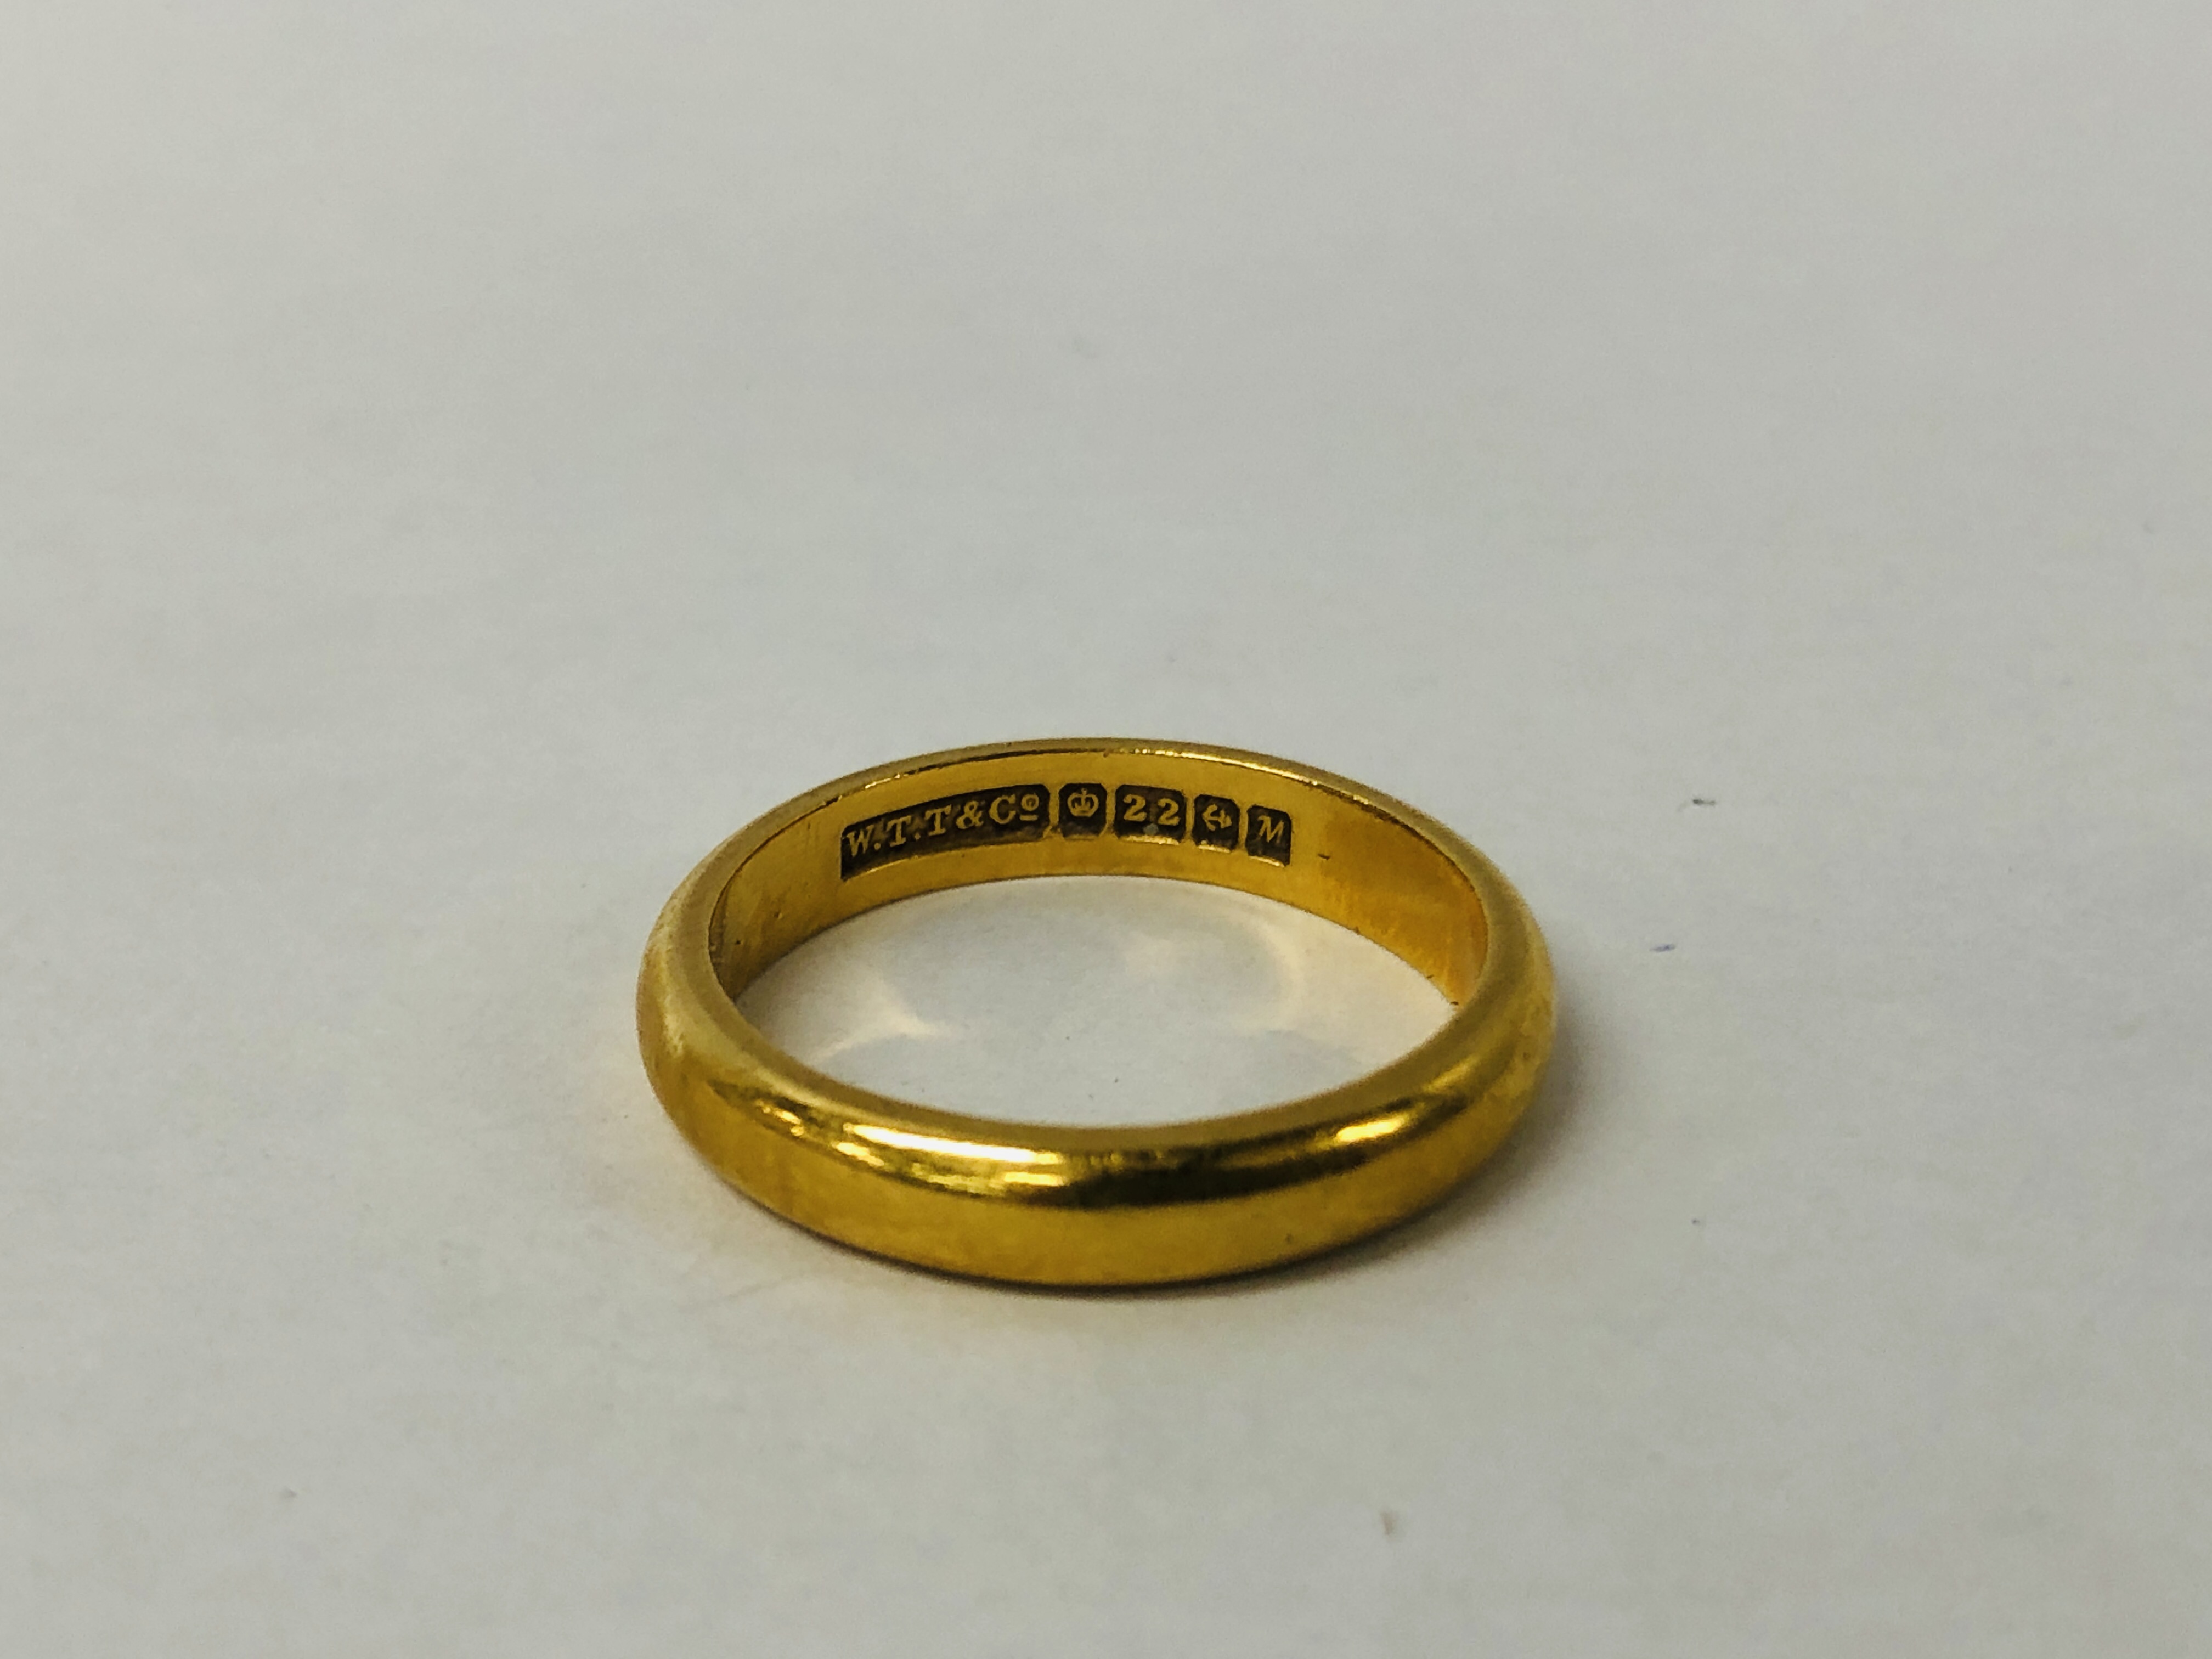 A 22CT GOLD WEDDING BAND. - Image 3 of 6